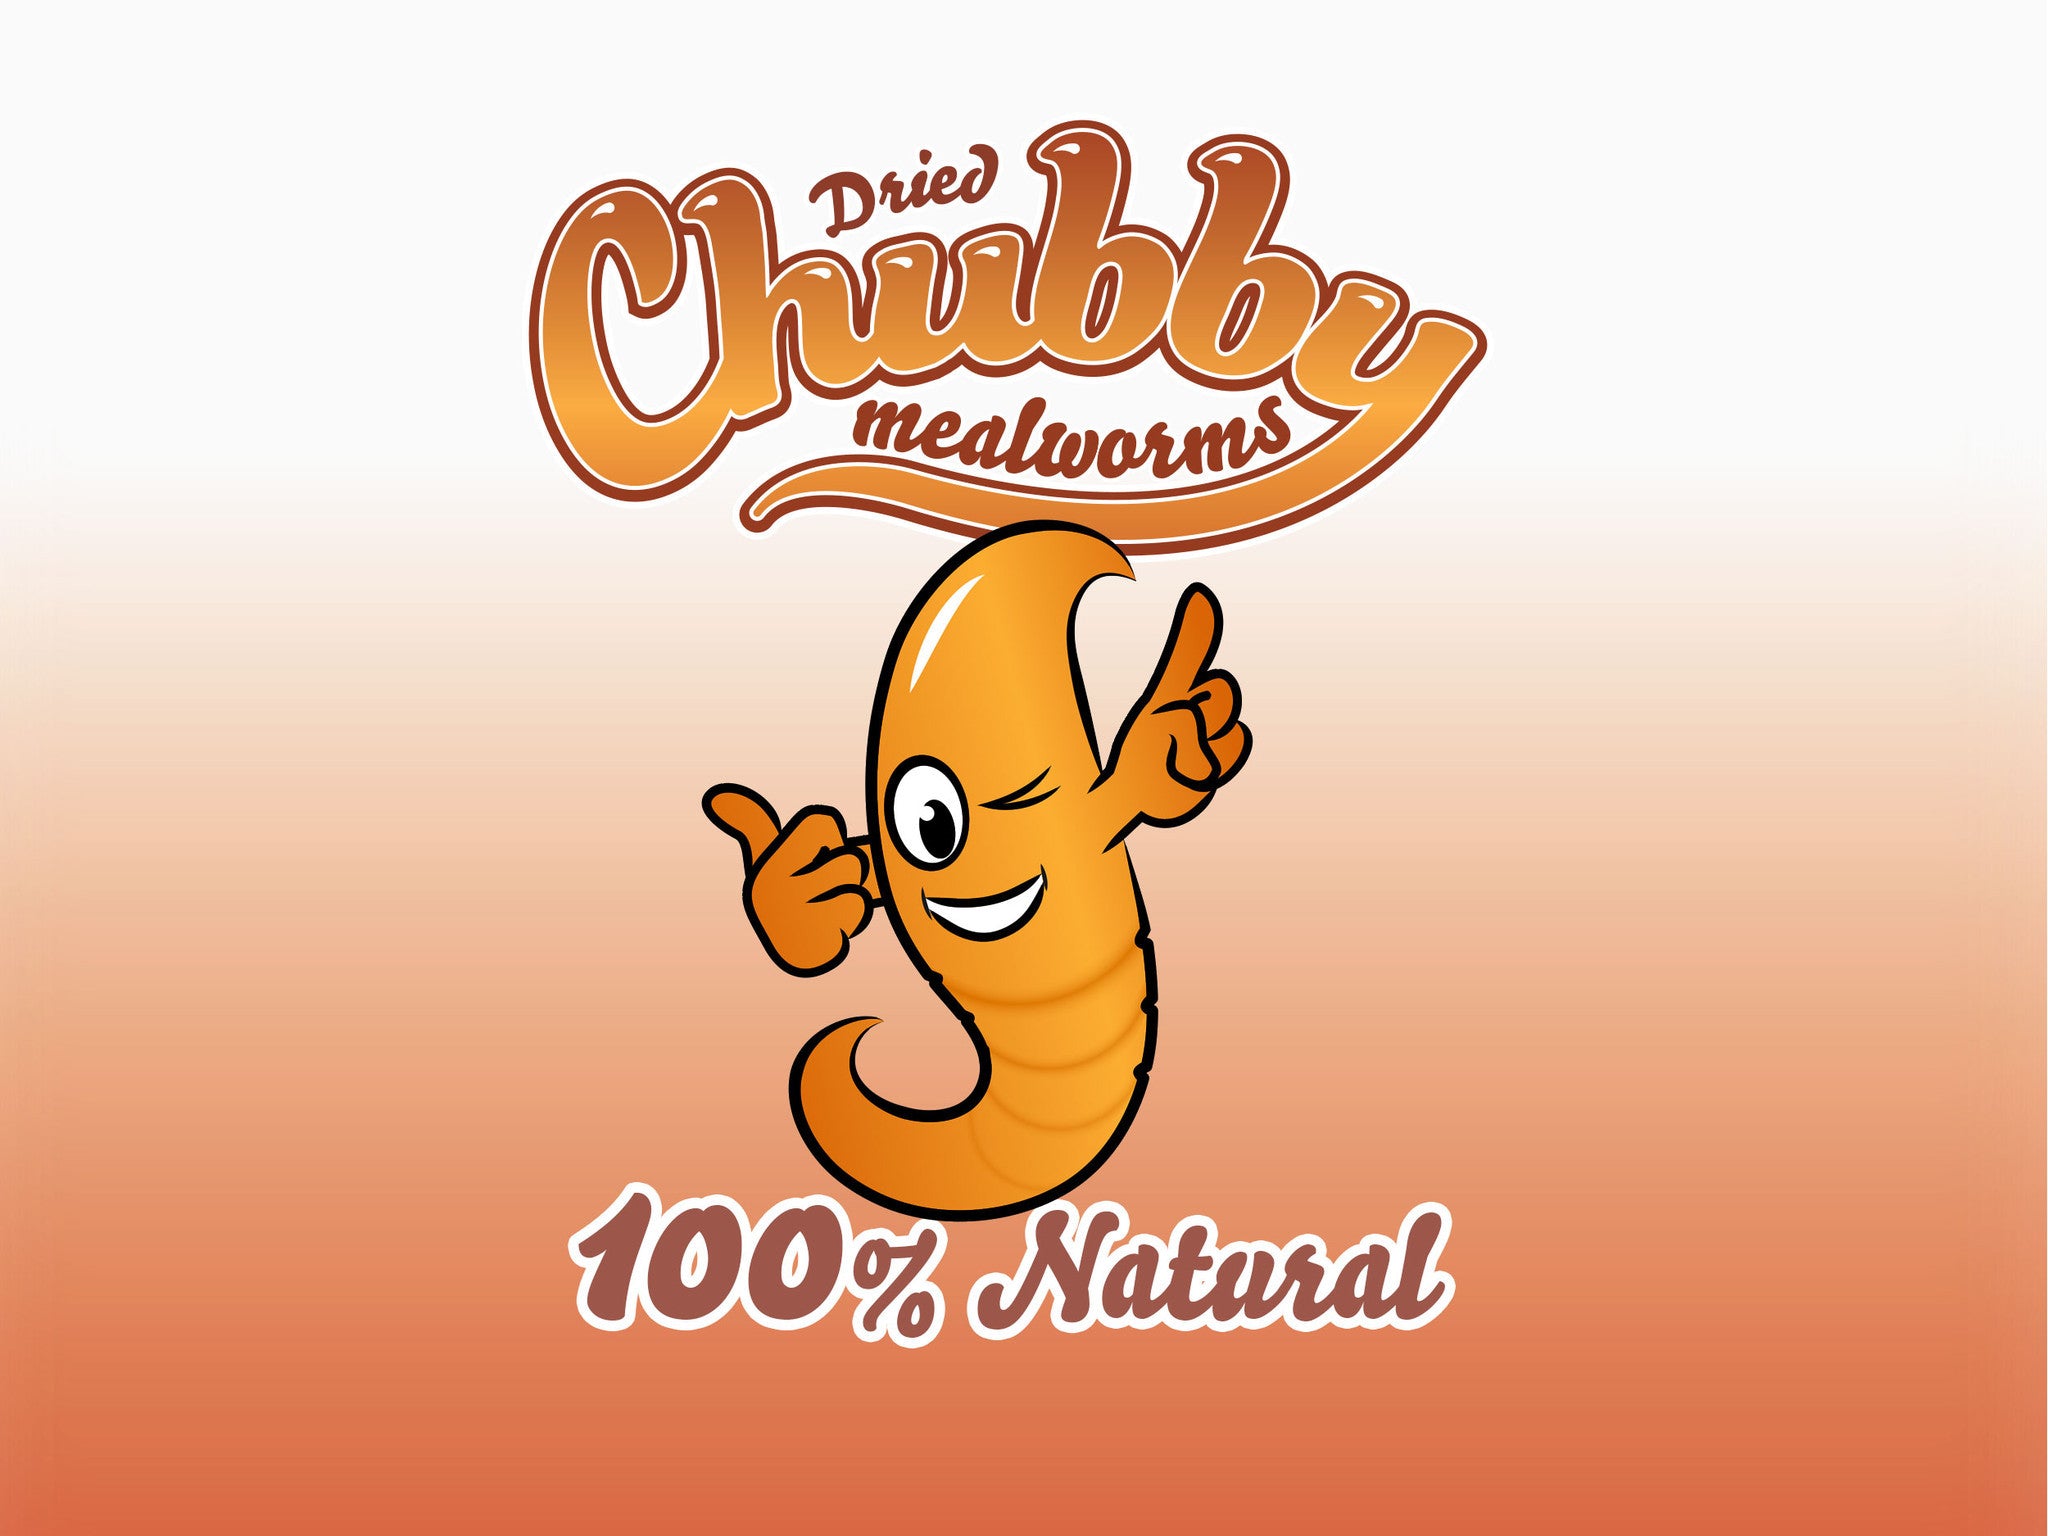 Soft Chubby Mealworms - Little Chubster -  - 2